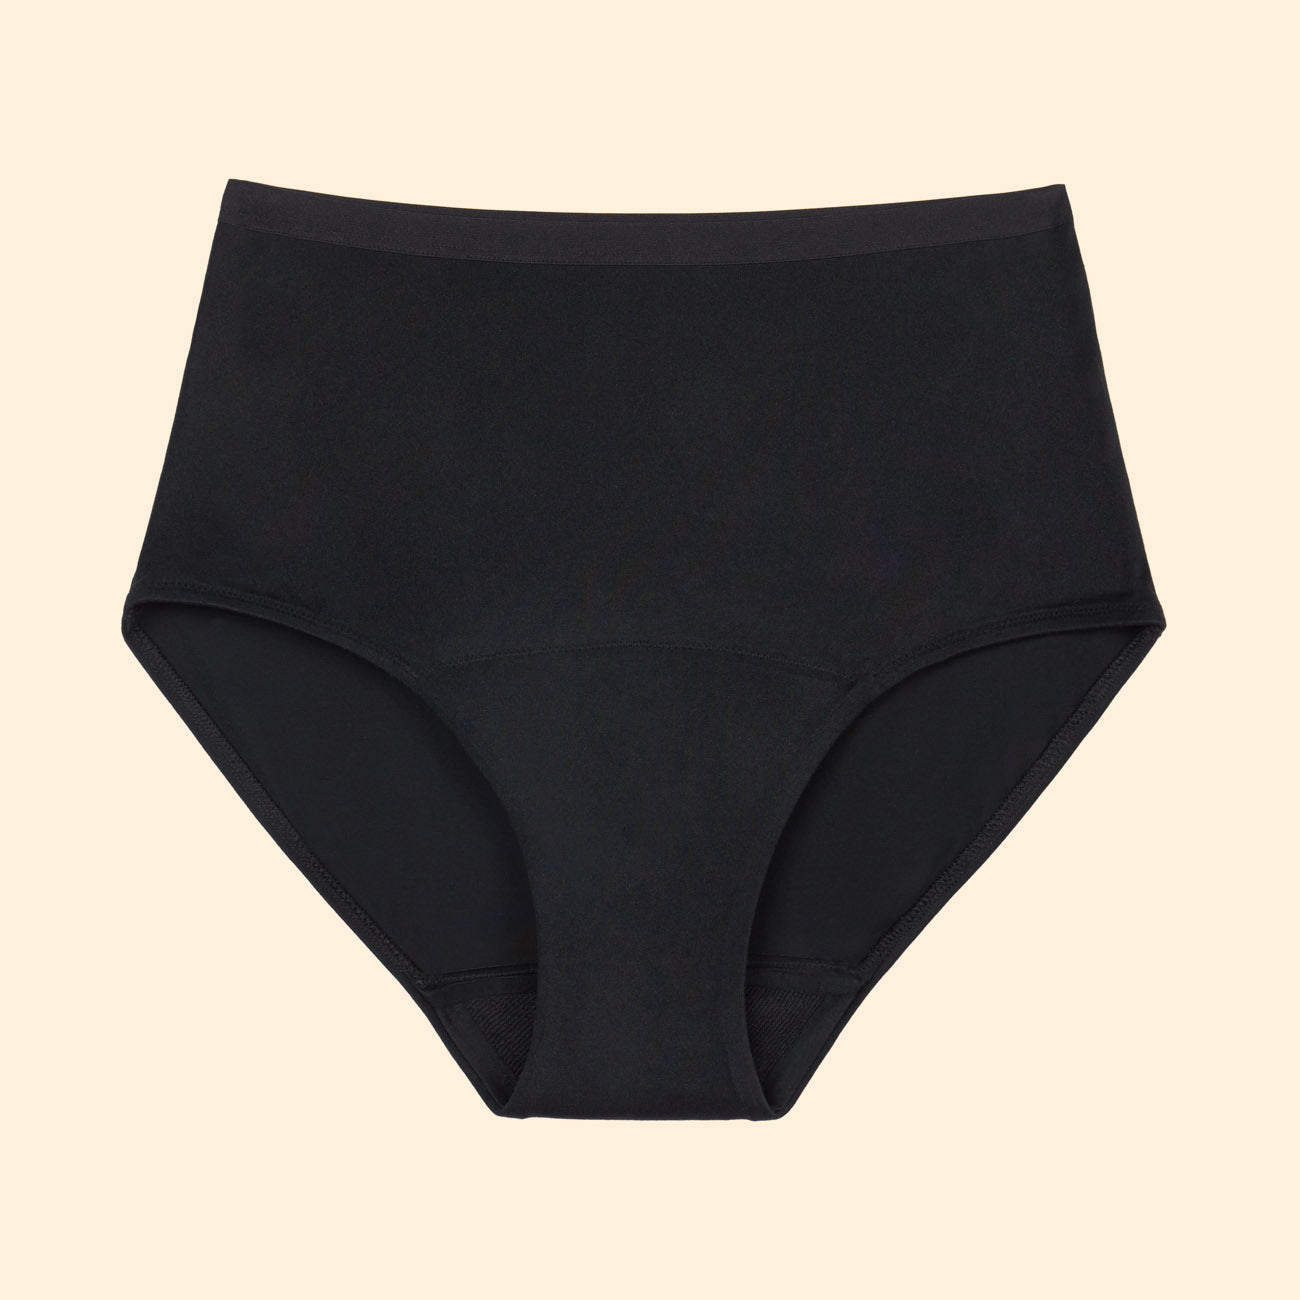 Speax by Thinx French Cut Incontinence Underwear for India